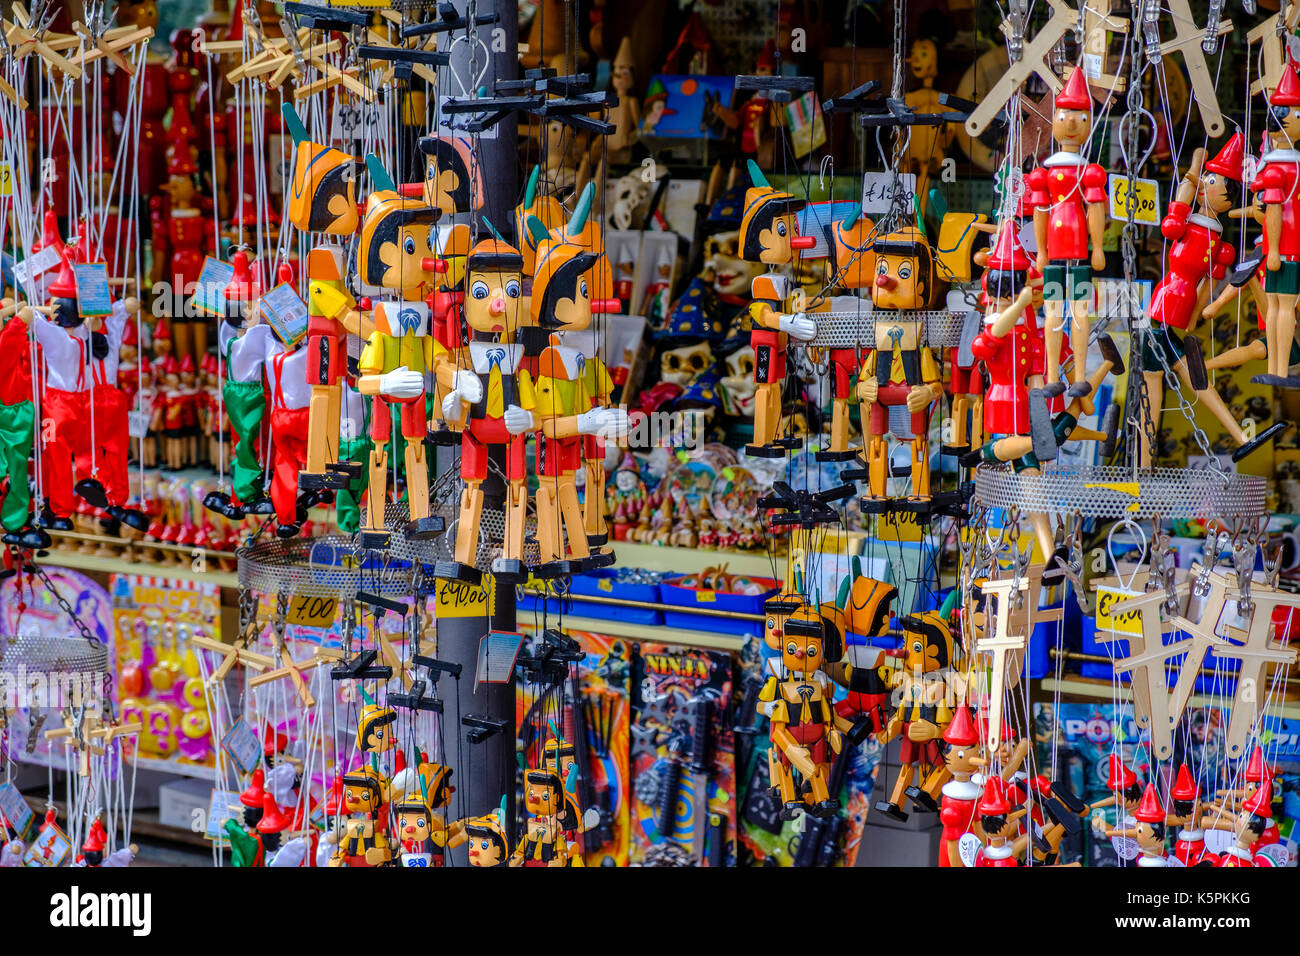 Small colorful woodcarved statues of Pinocchio are for sale as souvenirs Stock Photo